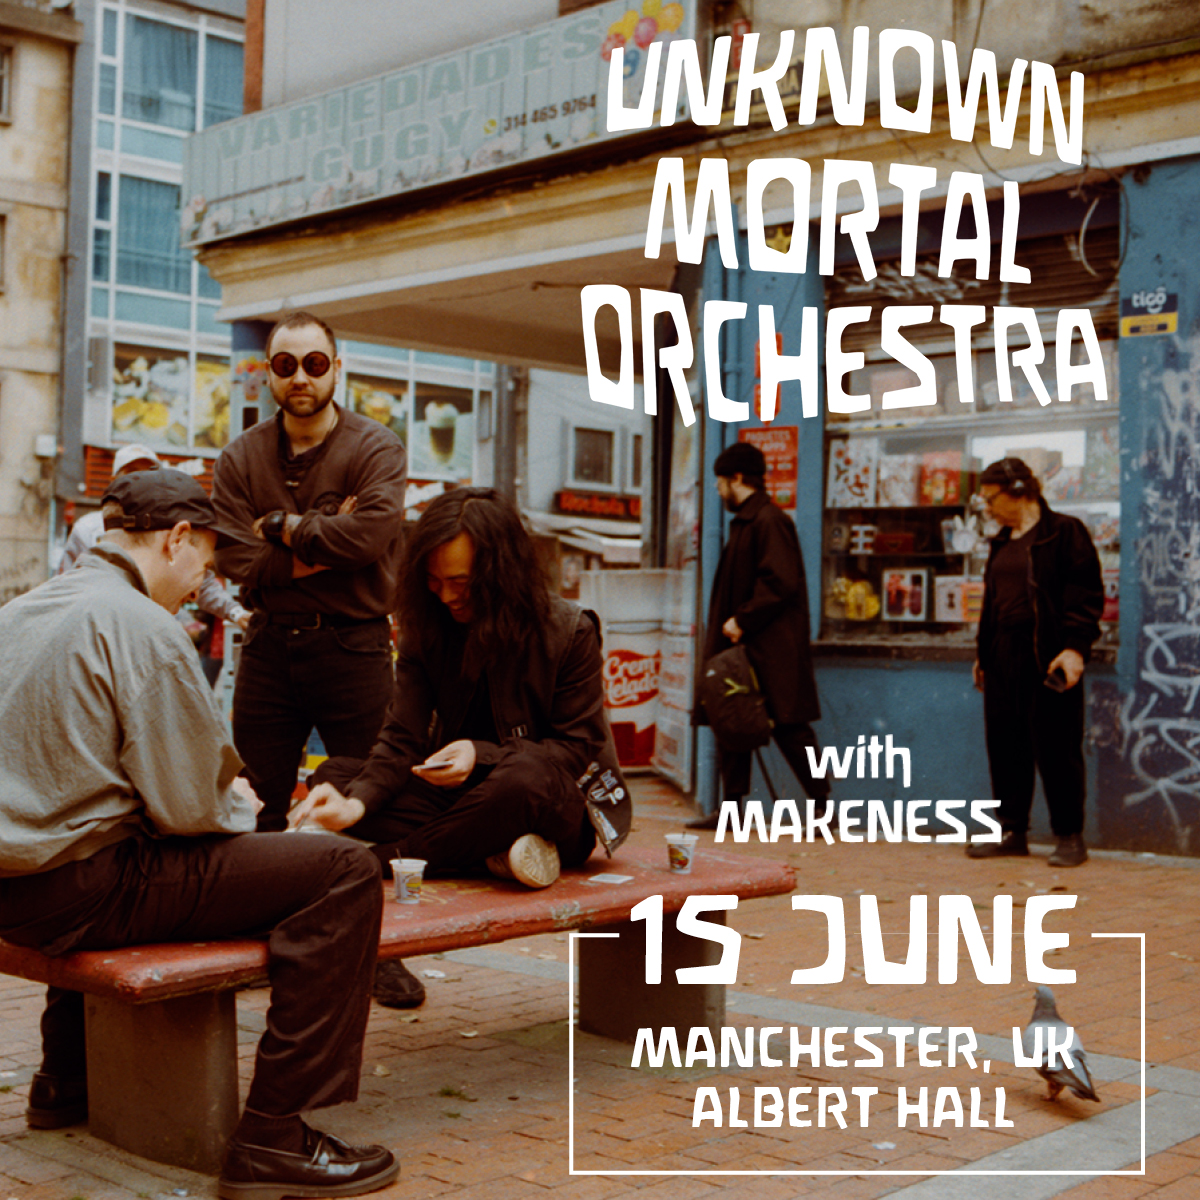 TWO WEEKS TO GO: On Thursday the 15th of June, @UMO are taking to our stage, as part of their UK + EU tour, following the release of their melodic fifth album, earlier this year! Tickets running low: tinyurl.com/55vnhzcc